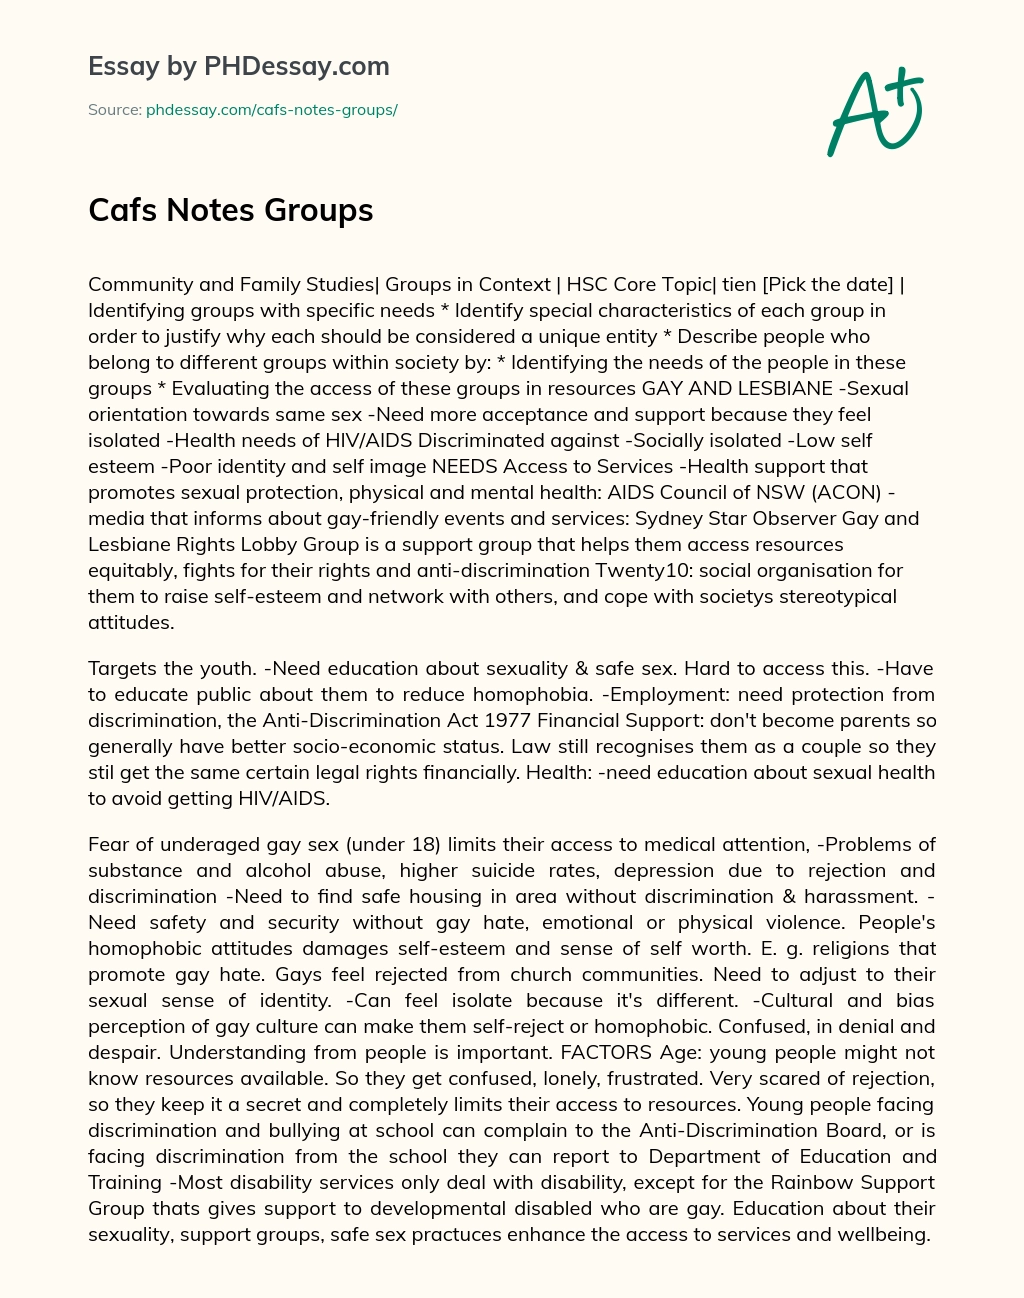 Cafs Notes Groups essay